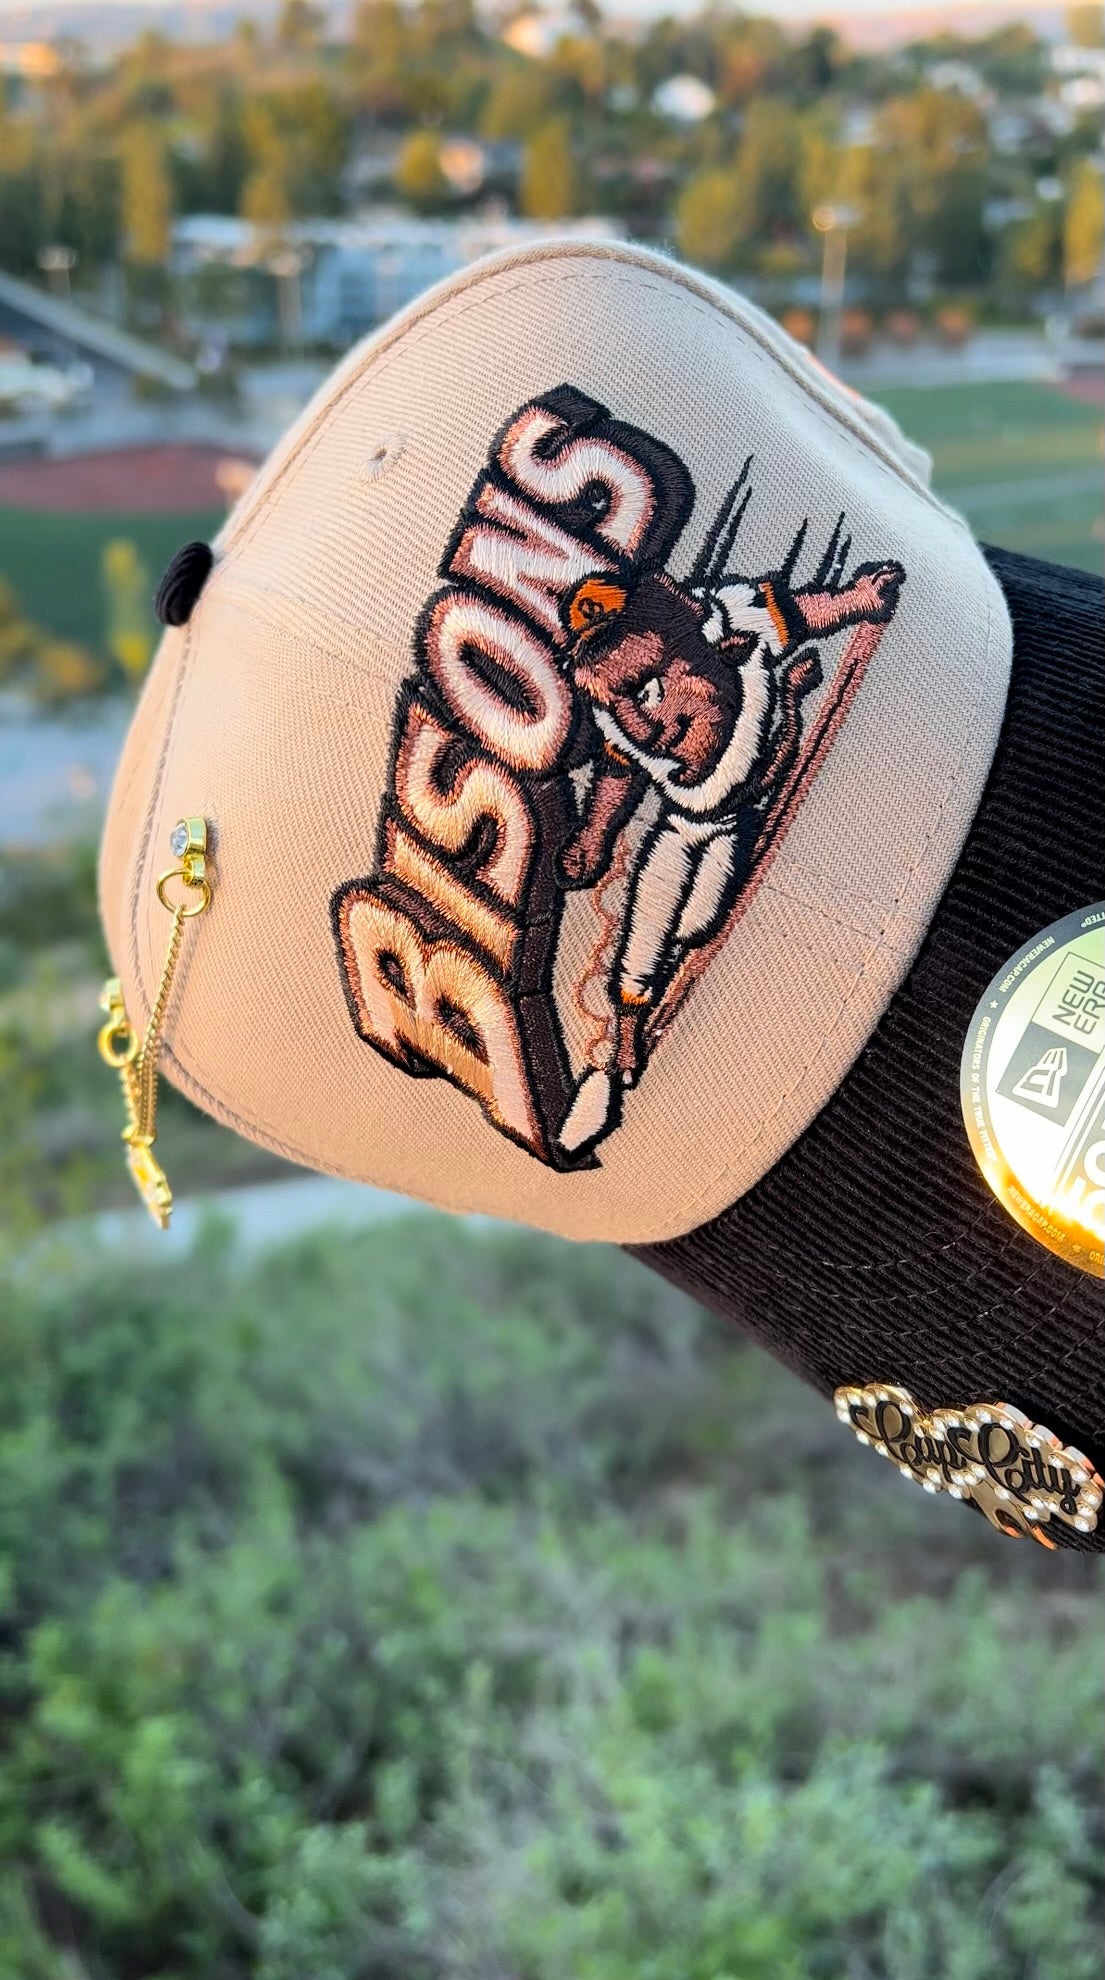 NEW ERA EXCLUSIVE 59FIFTY KHAKI/CORDUROY BUFFALO BISONS W/ HOMETOWN COLLECTION PATCH